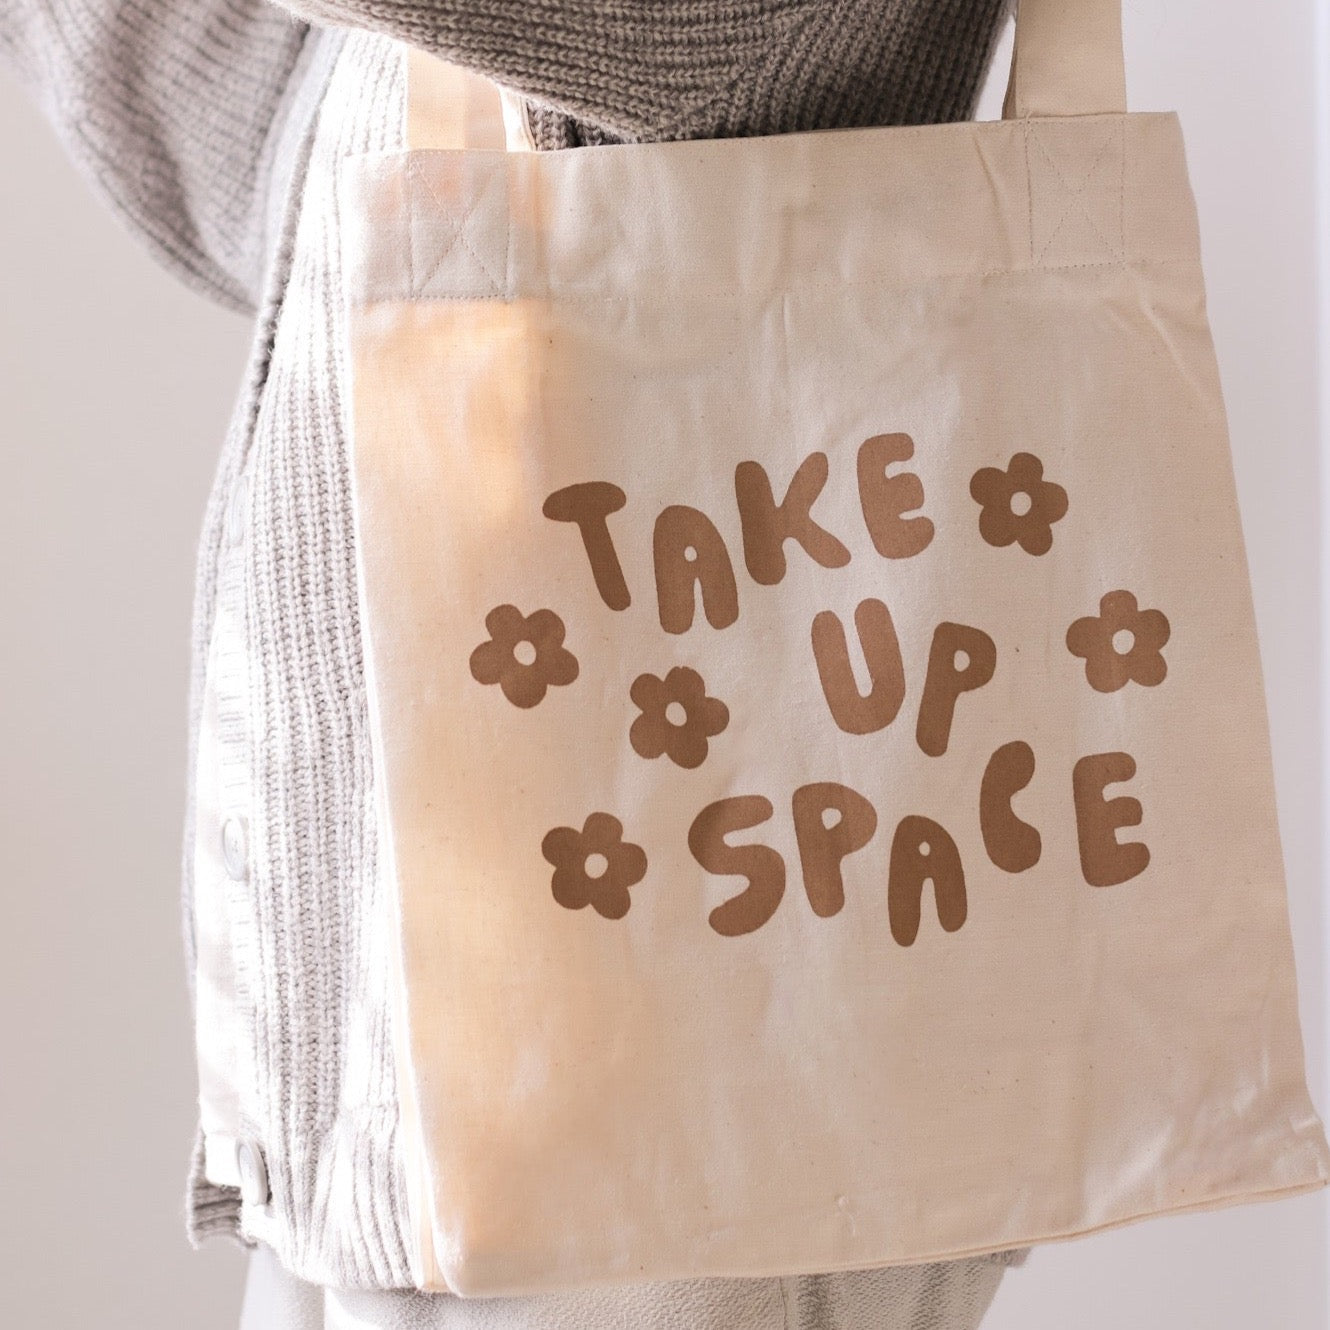 take up space tote